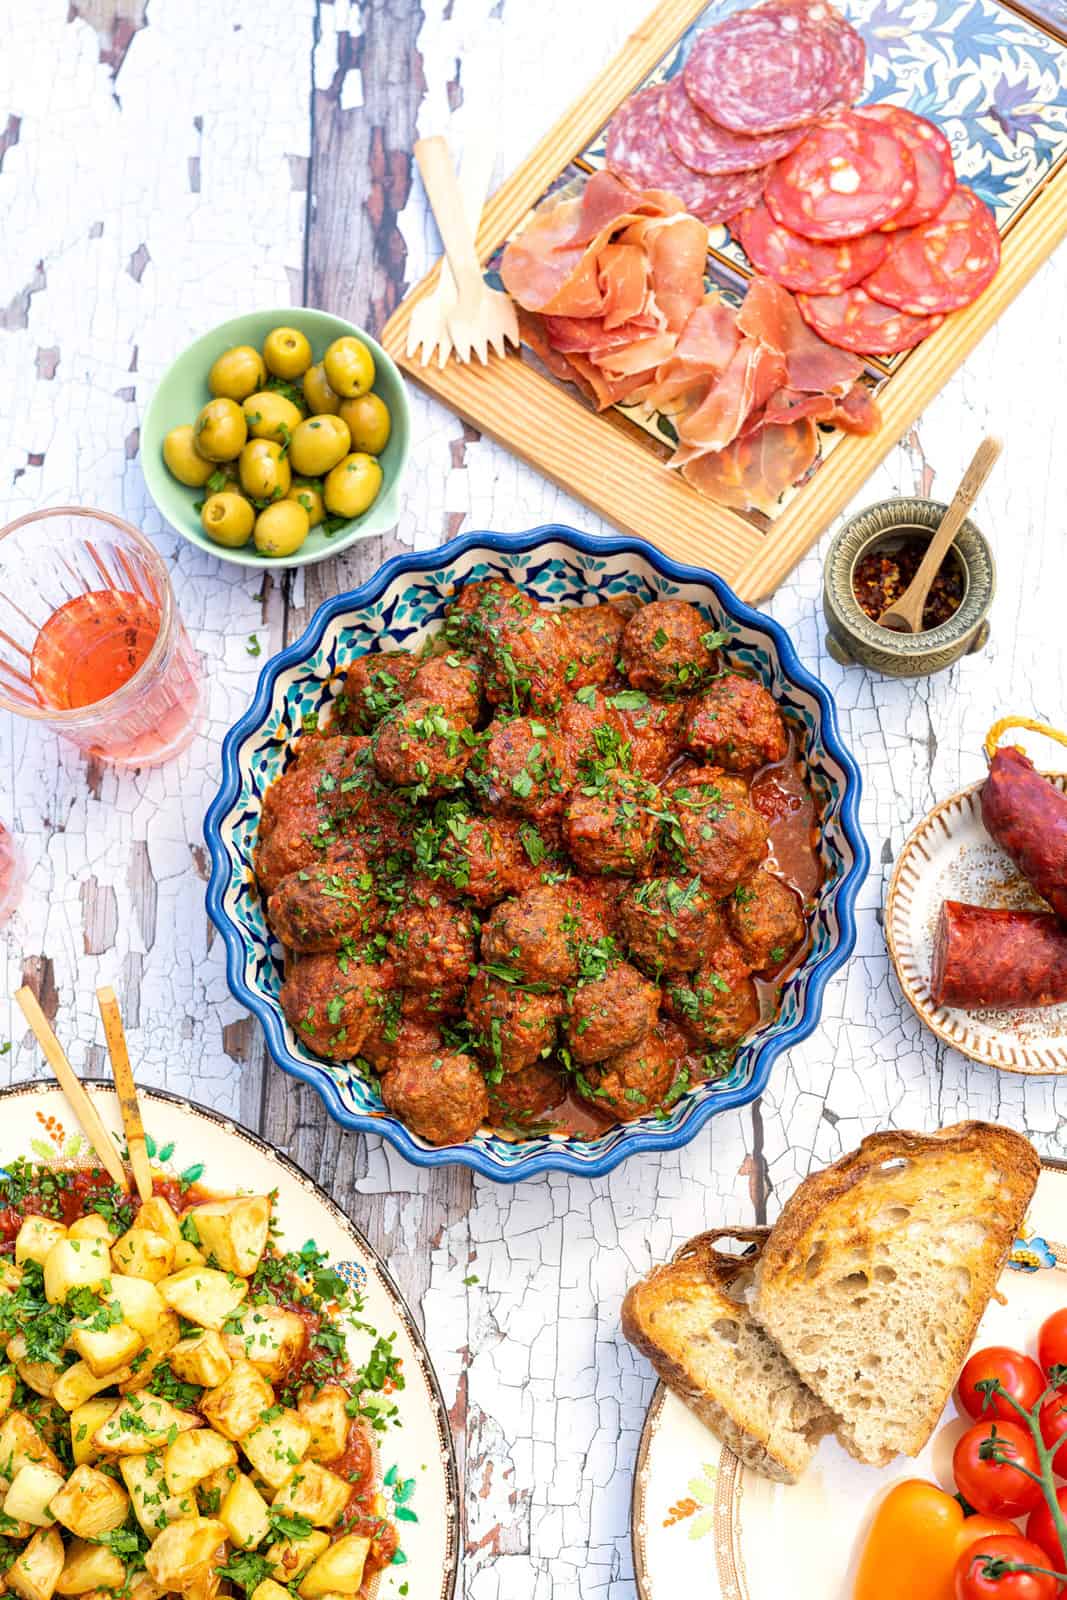 Spanish meatballs in a ceramic bowl as part of a tapas spread